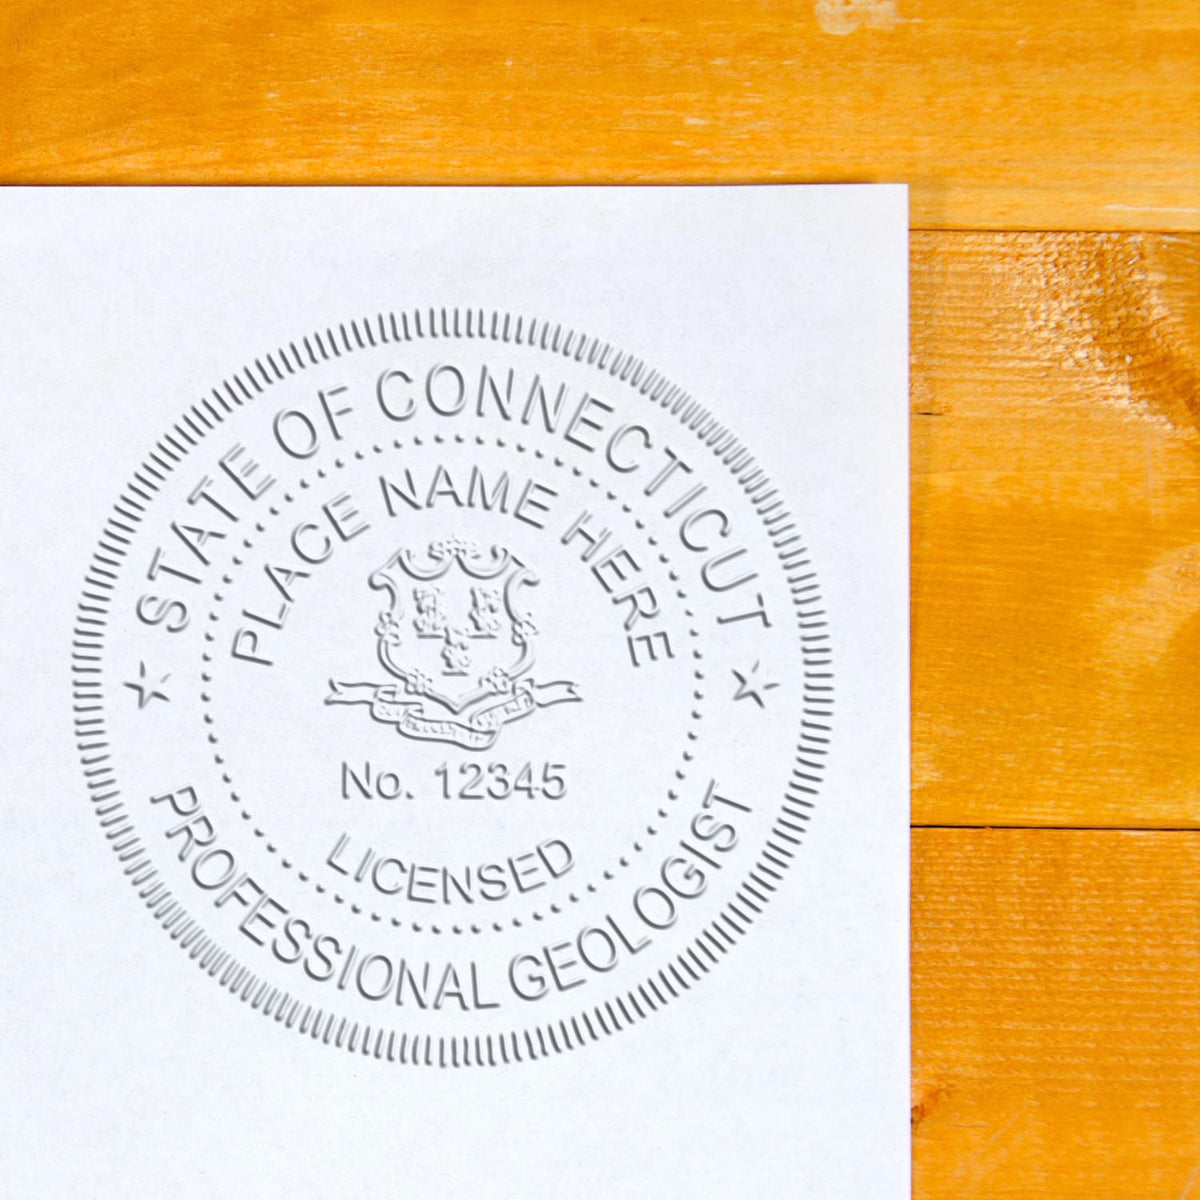 Another Example of a stamped impression of the Handheld Connecticut Professional Geologist Embosser on a office form